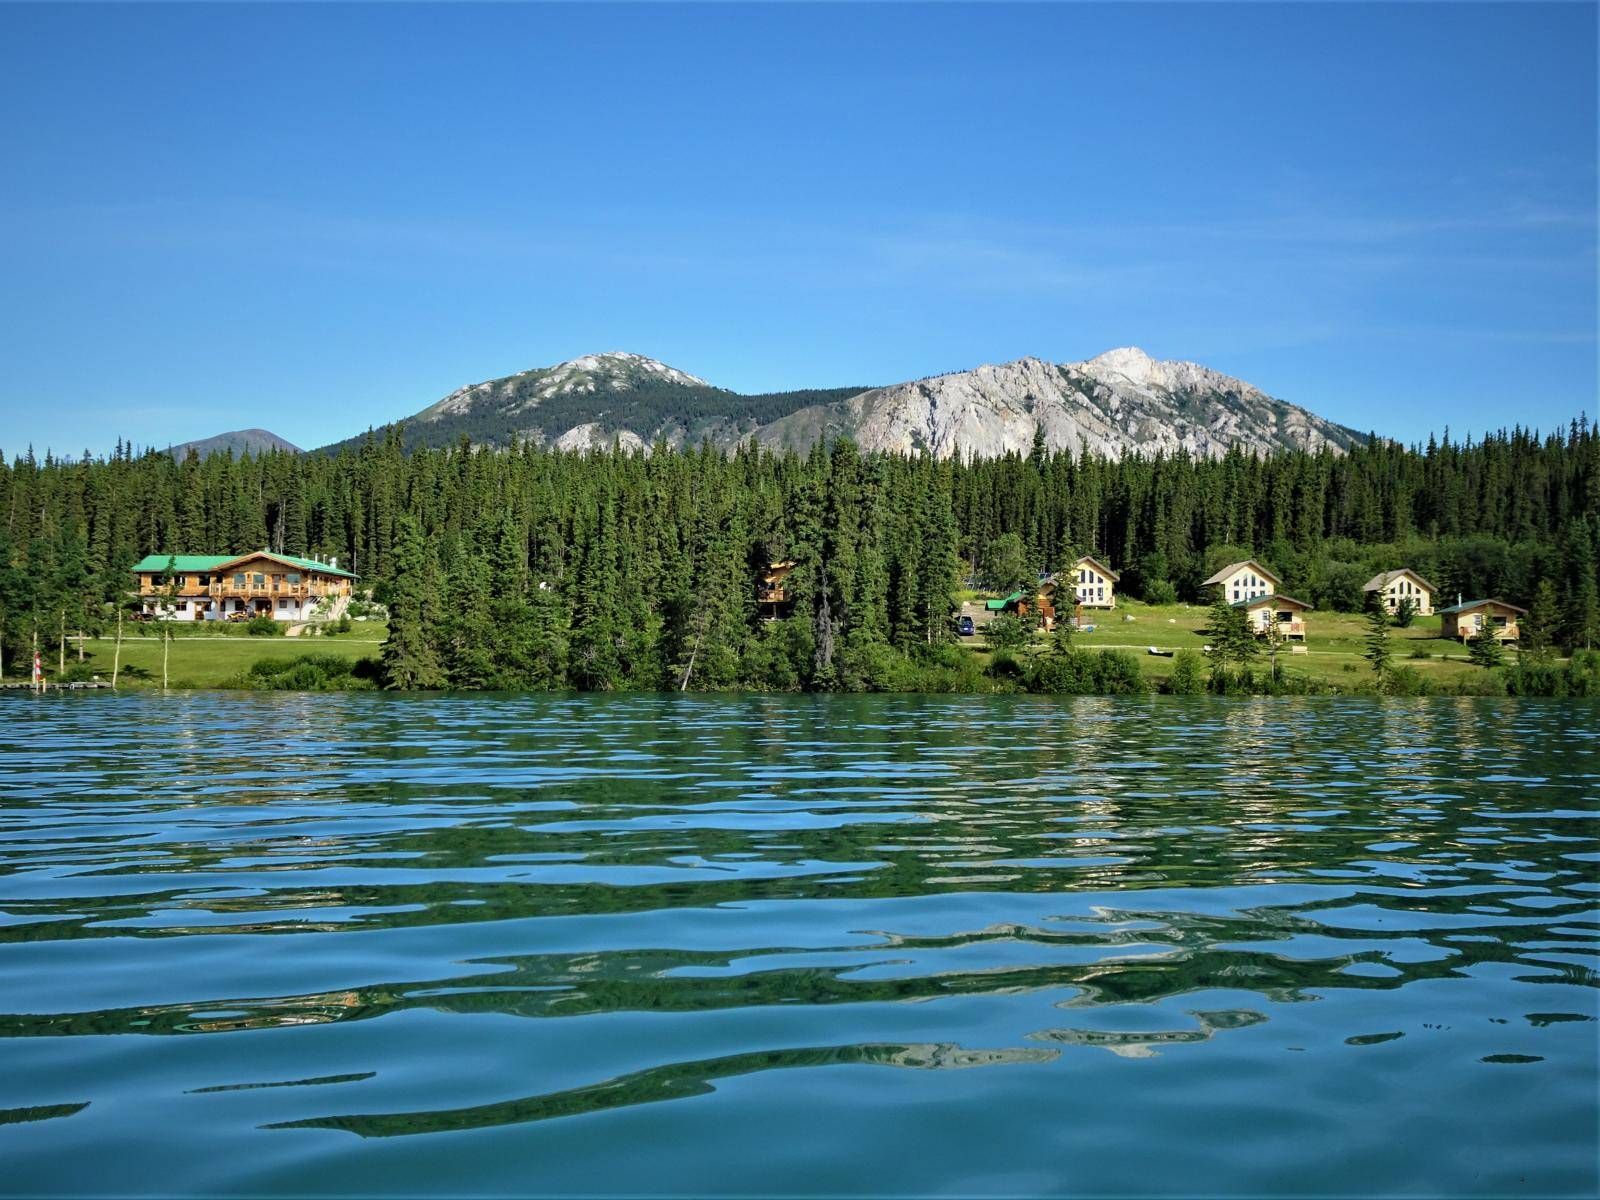 View from the lake to the property and the cabins